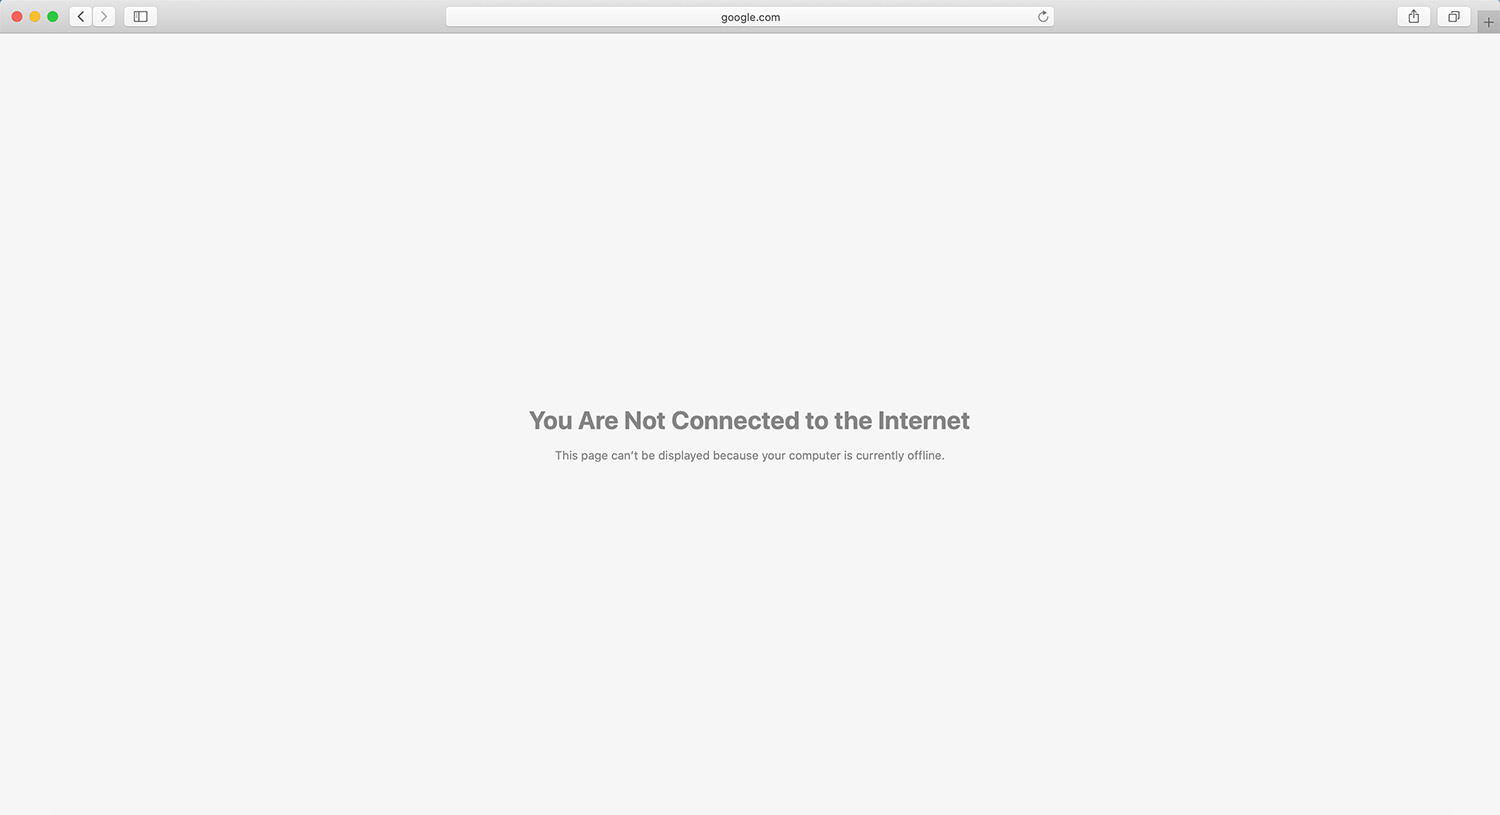 macOS not connected to internet